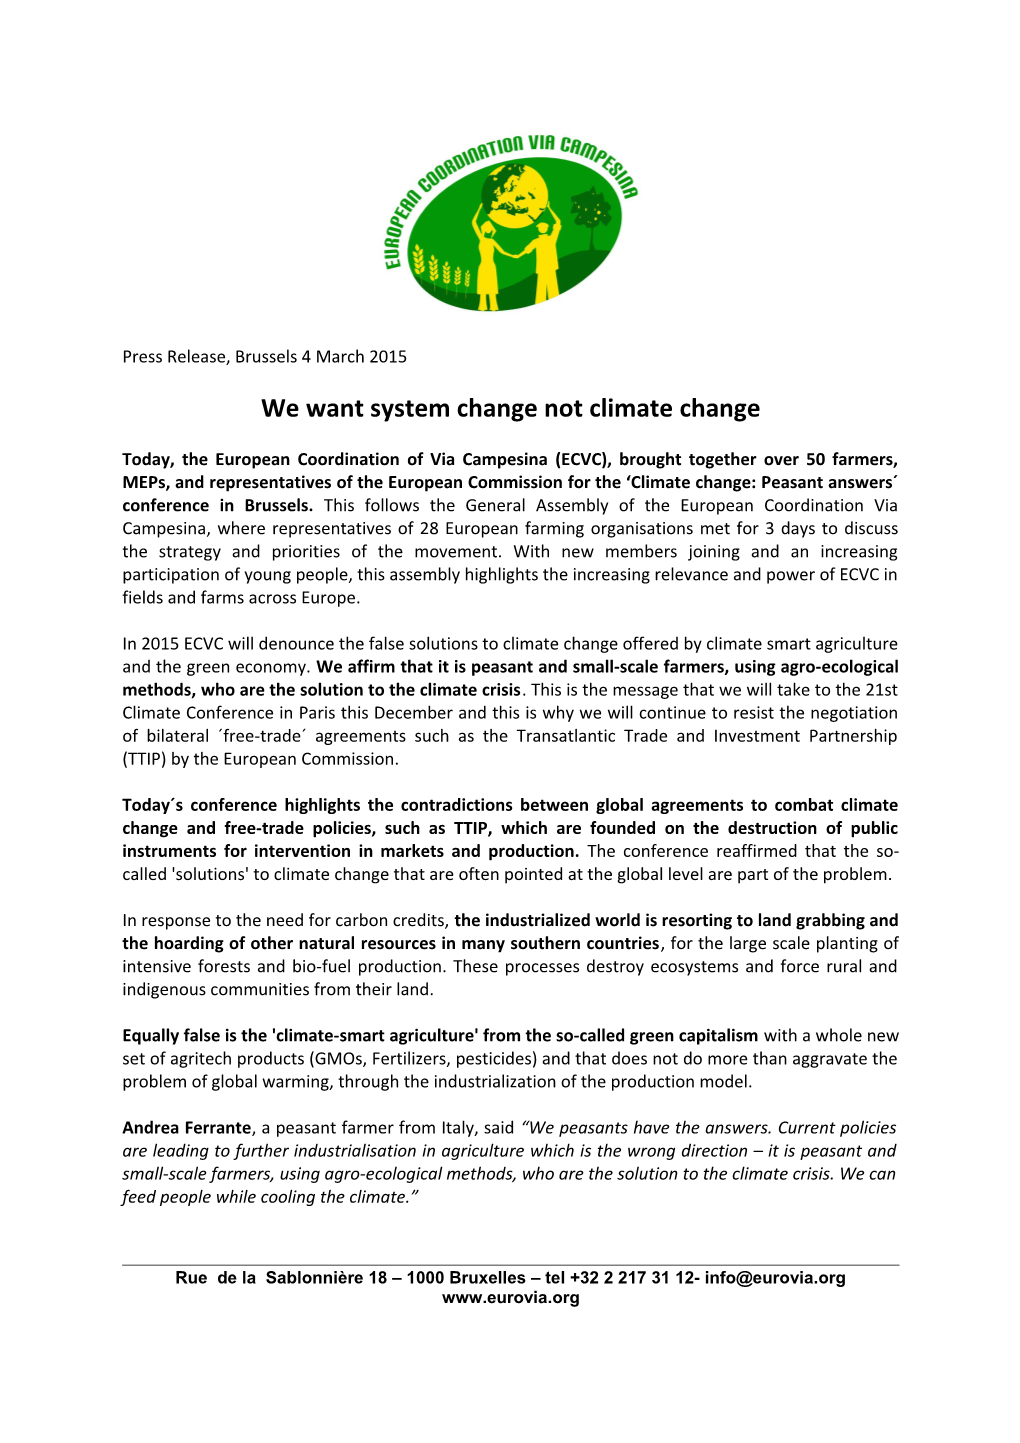 We Want System Change Not Climate Change